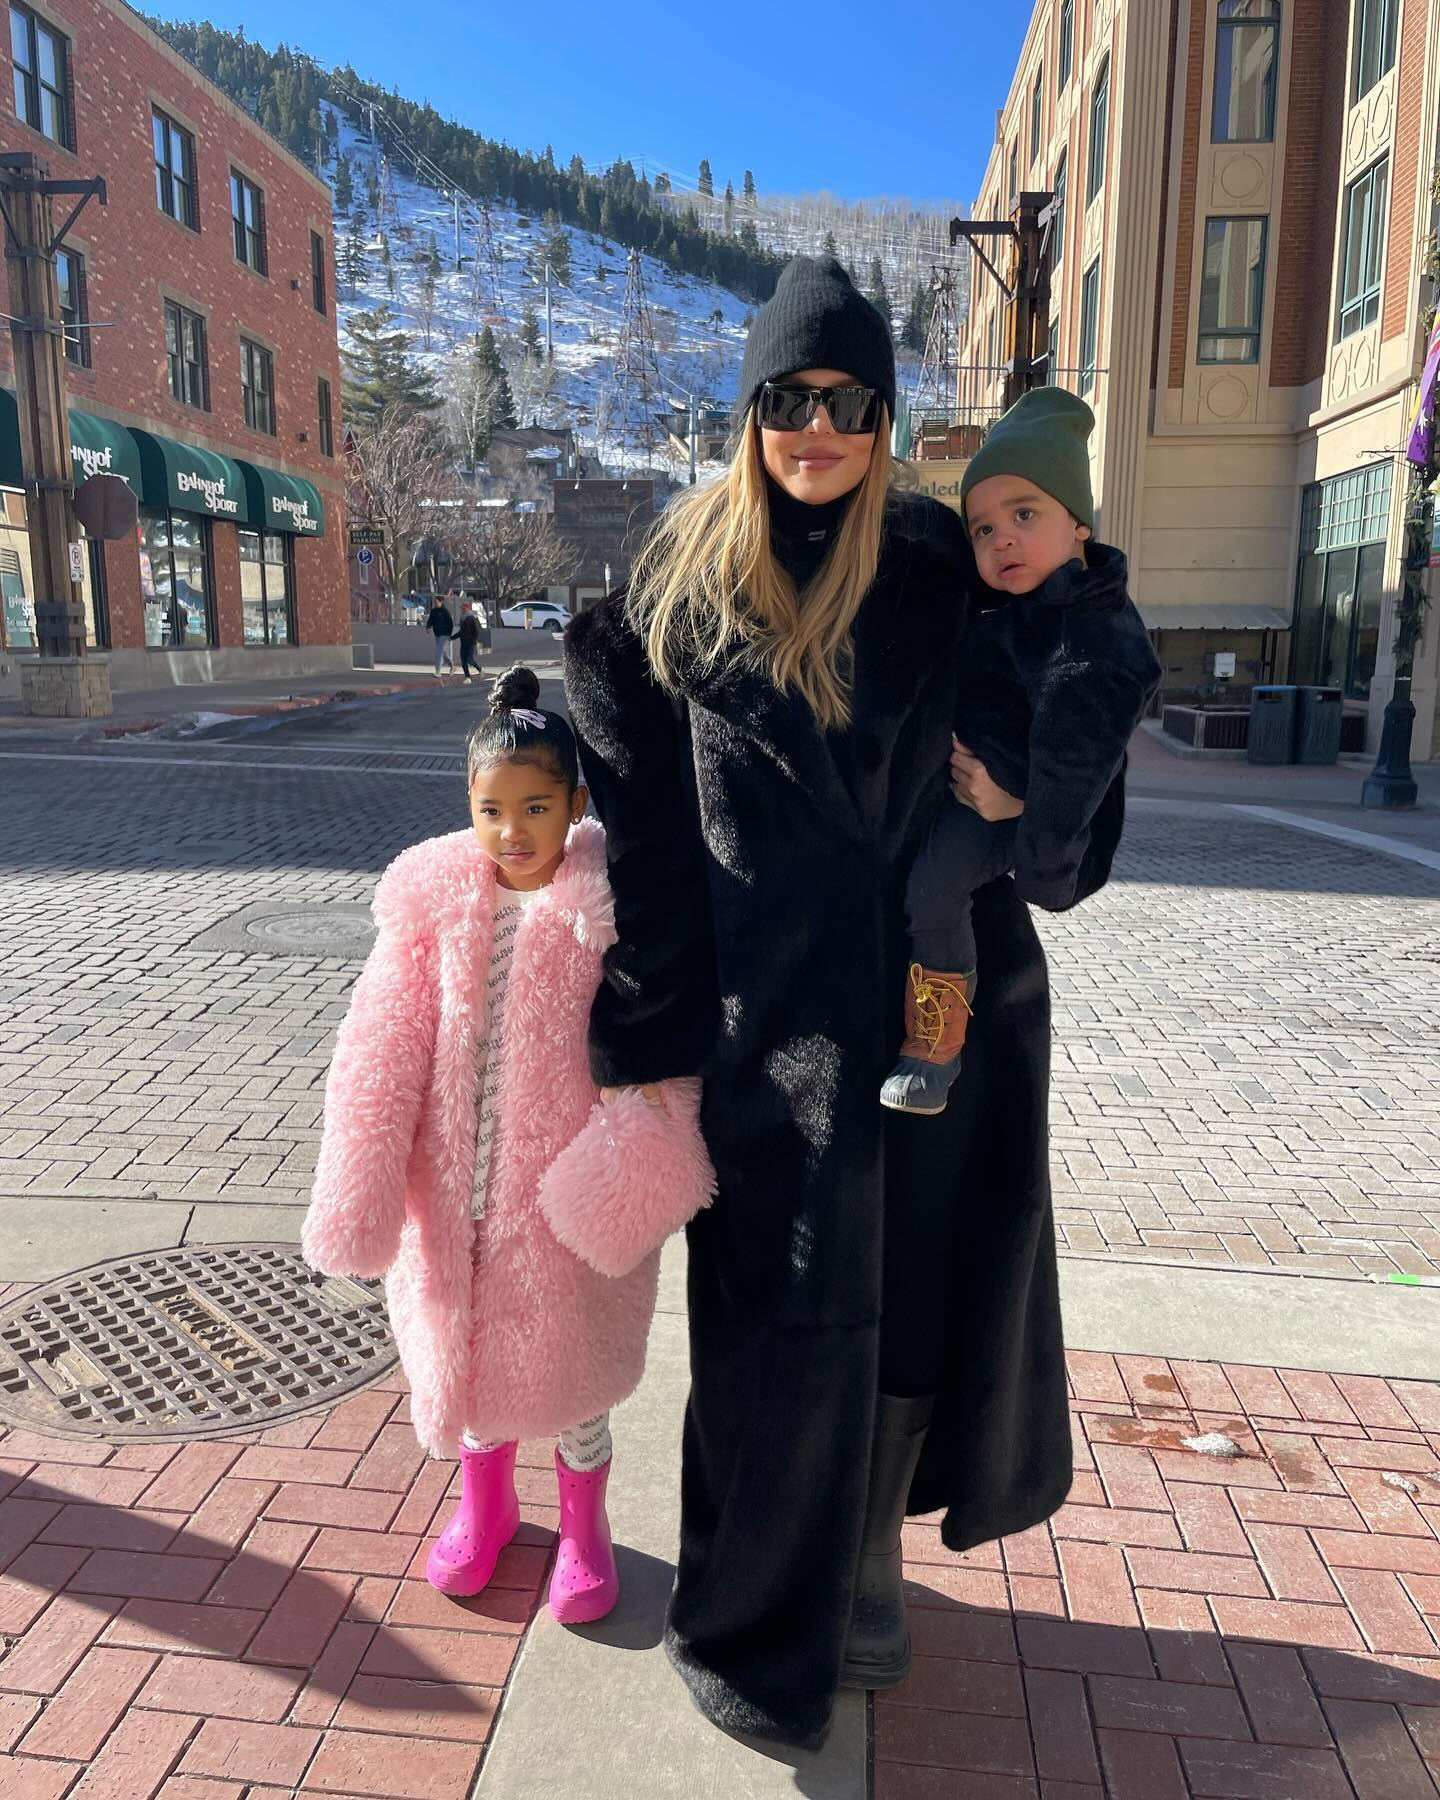 Khloe pictured with her daughter Tru and son Tatum